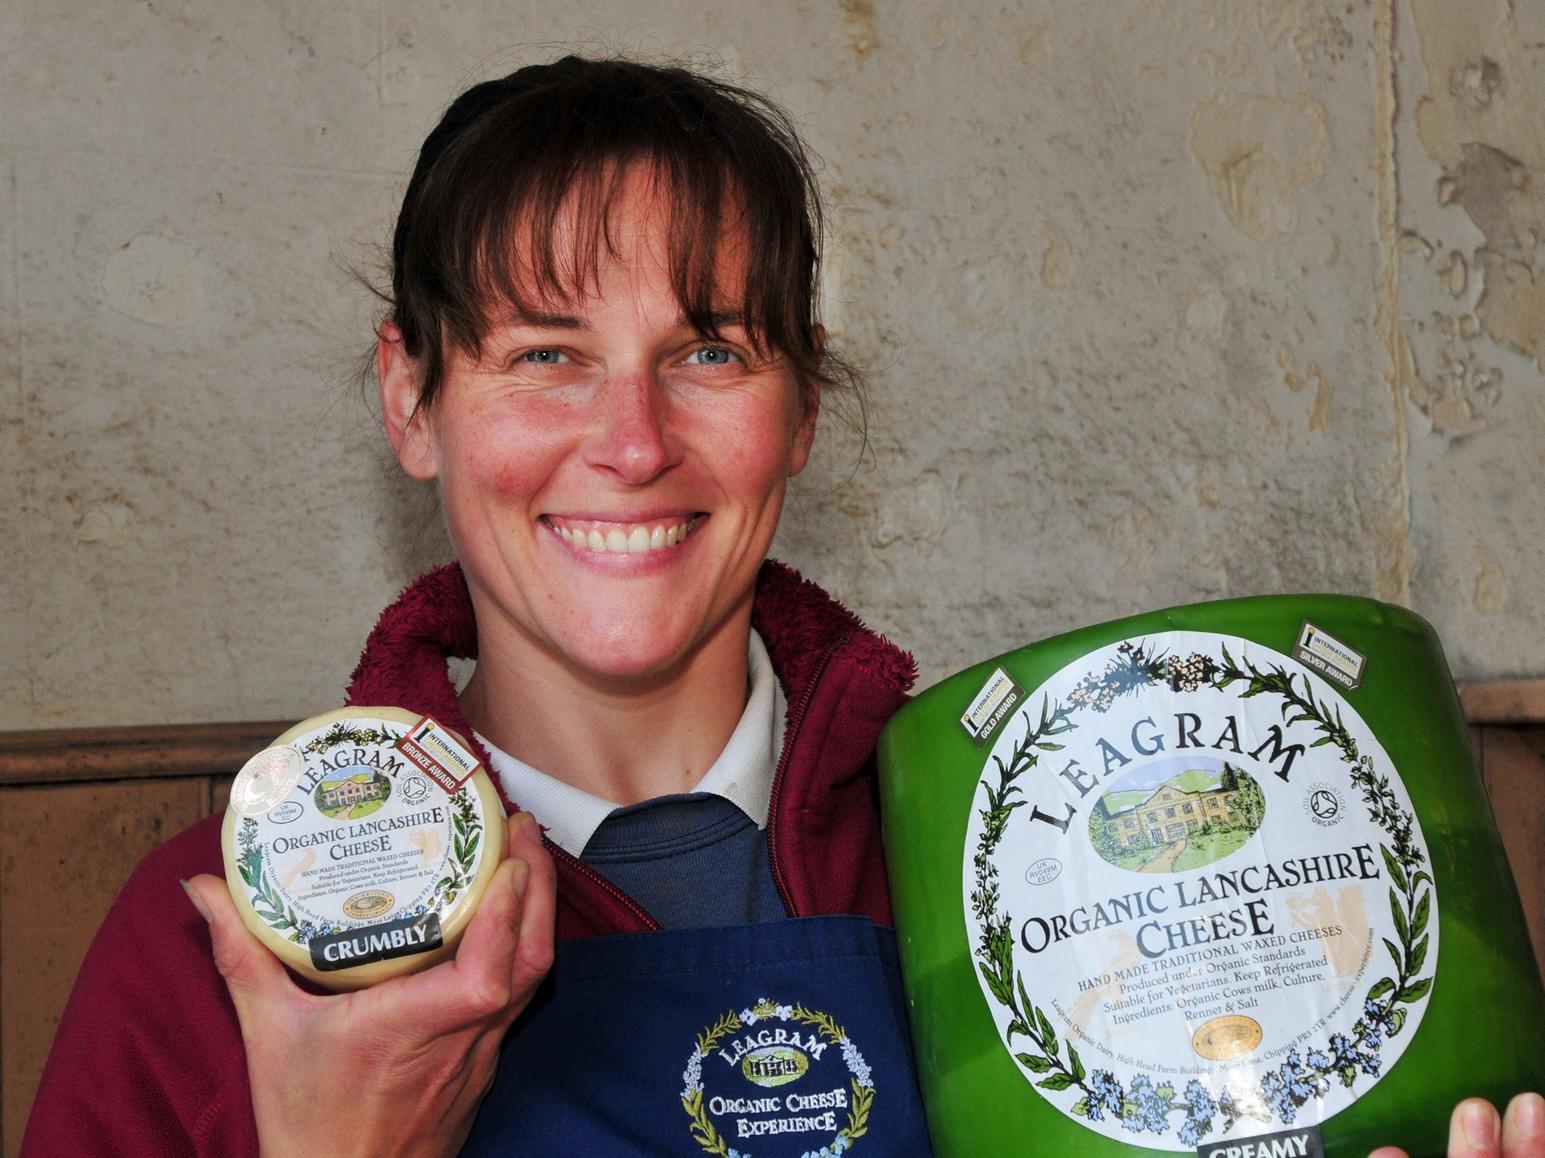 Leagram Organic Dairy, in Chipping, creates a range of cheeses including the native creamy and crumbly Lancashire, together with a mild cheddar, a buttery Double Gloucester, a smooth Red Leicester, numerous creamy goats and sheeps cheeses.